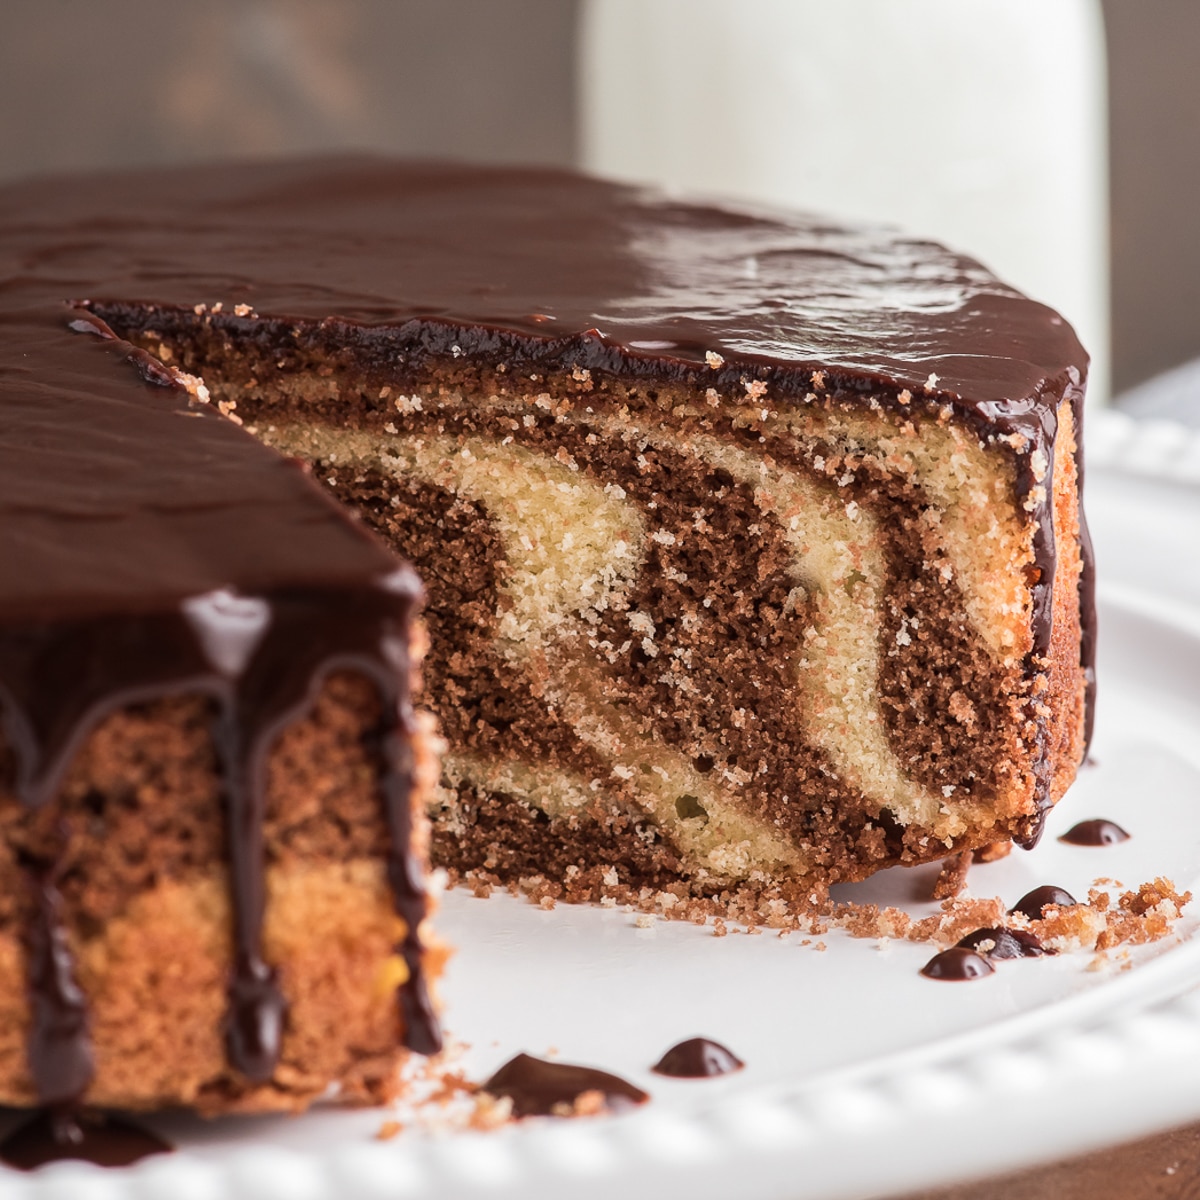 Marble Cake (from Cake Mix) - My Cake School